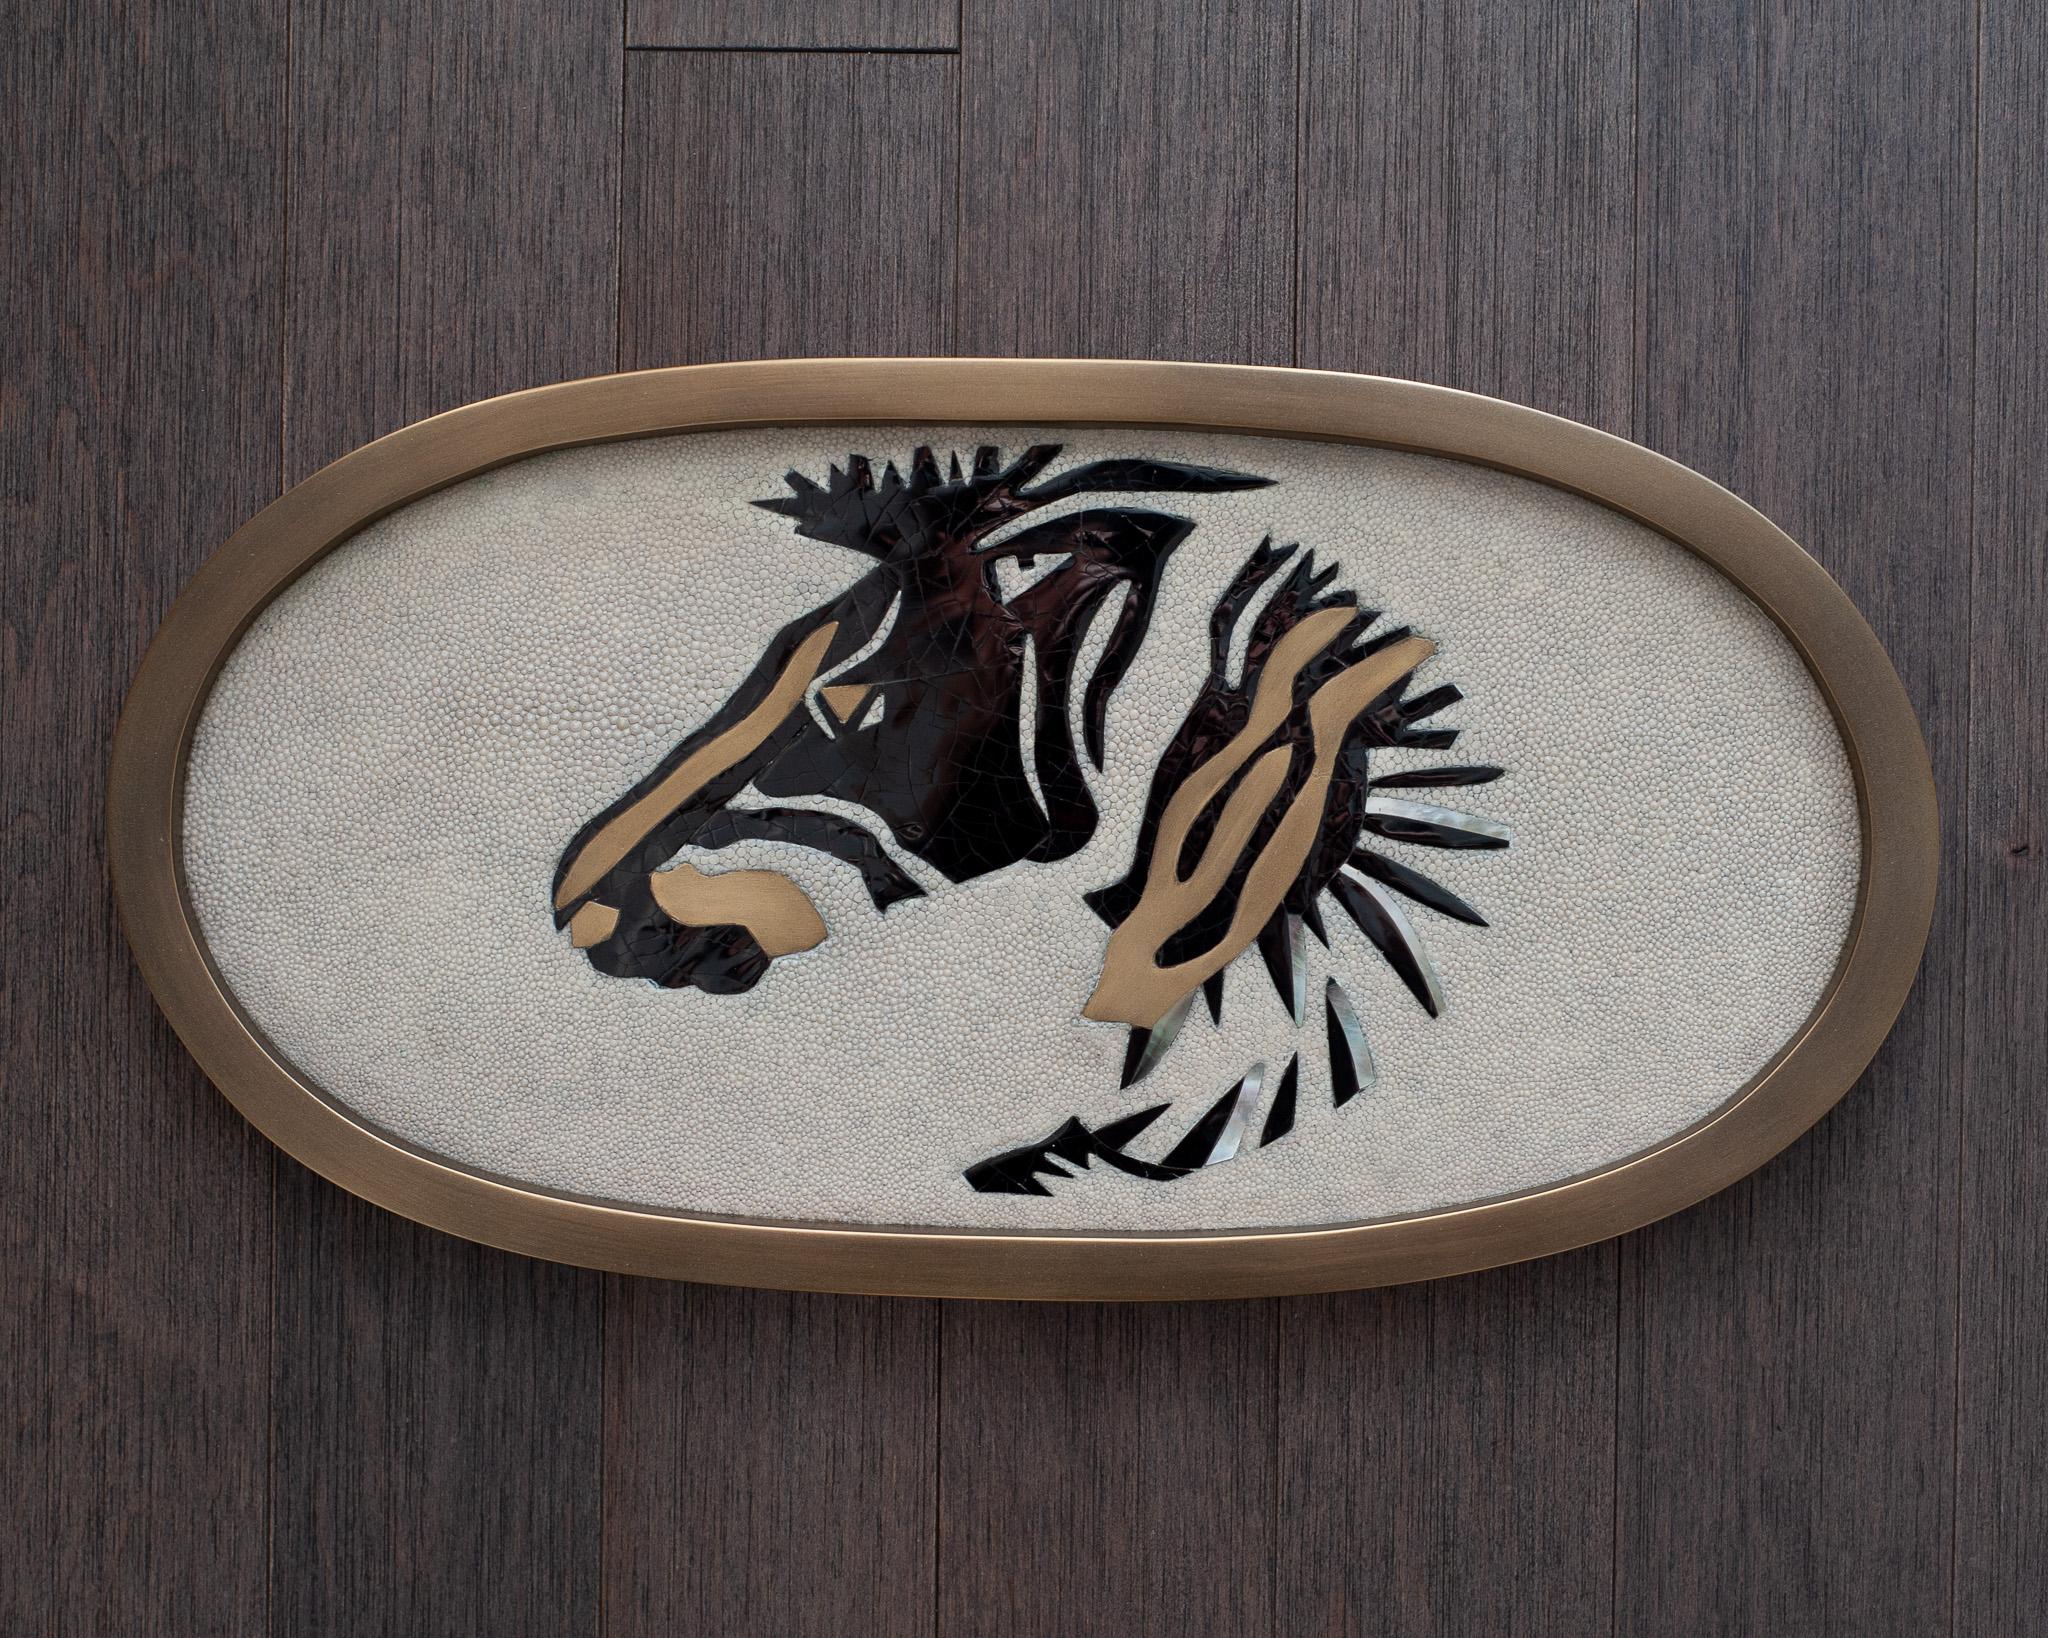 In stock now - A stunning and beautifully crafted Kifu Paris zebra serving tray, with brass, creme shagreen, mother of pearl, and black penshell inlay, over a base of walnut and covered in leather on the bottom. Expertly crafted, this tray is a